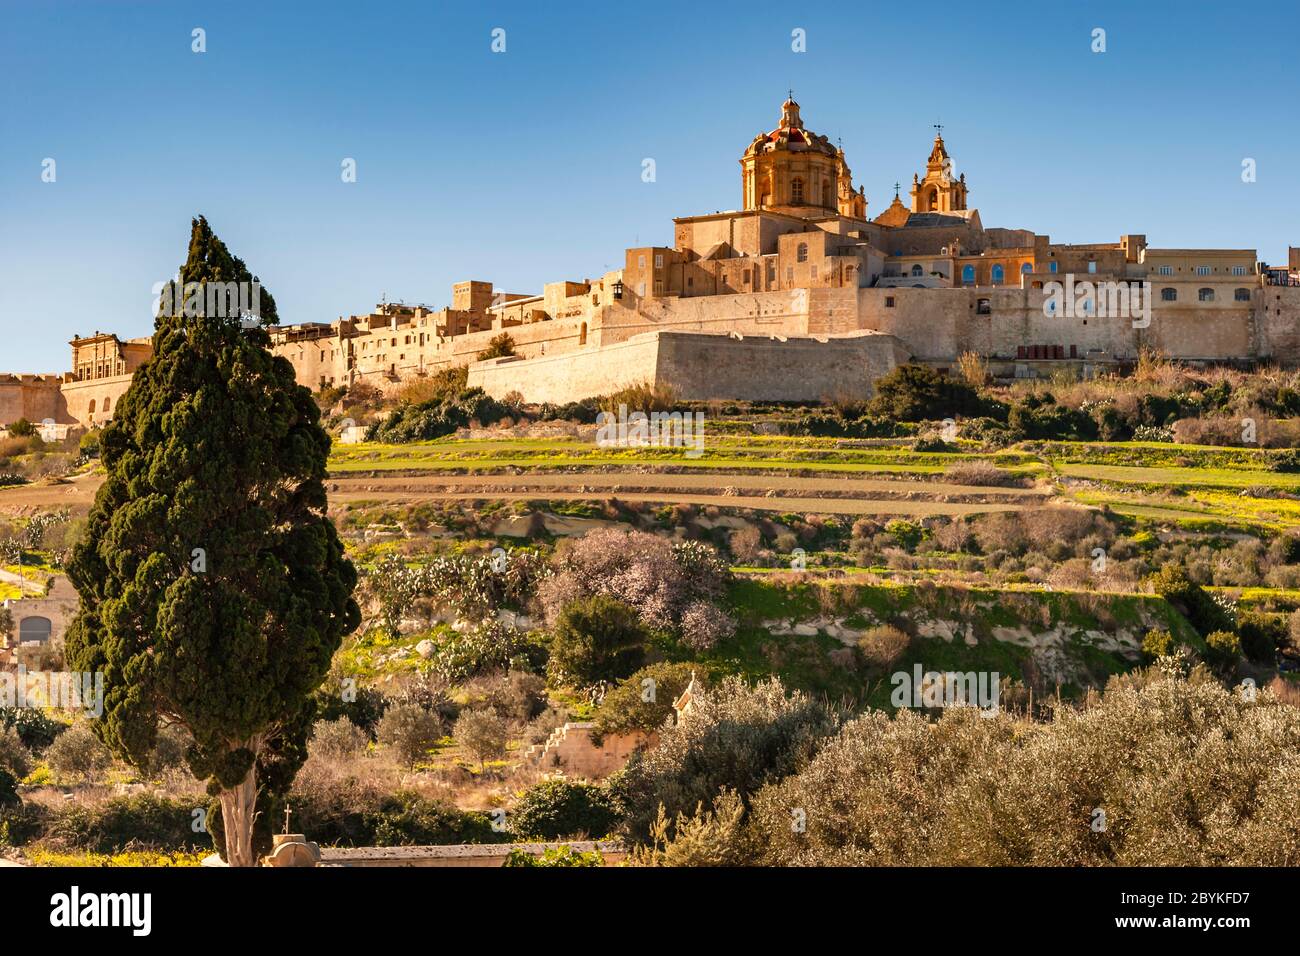 Old town of Mdina on the isle of Malta with the Catholic Baroque Church of St. Paul and Palazzo Falson. According to legend, the apostle Paul of Tarsus was shipwrecked on Malta, survived the rough landing well and began the Christianization of the islanders without much ado Stock Photo